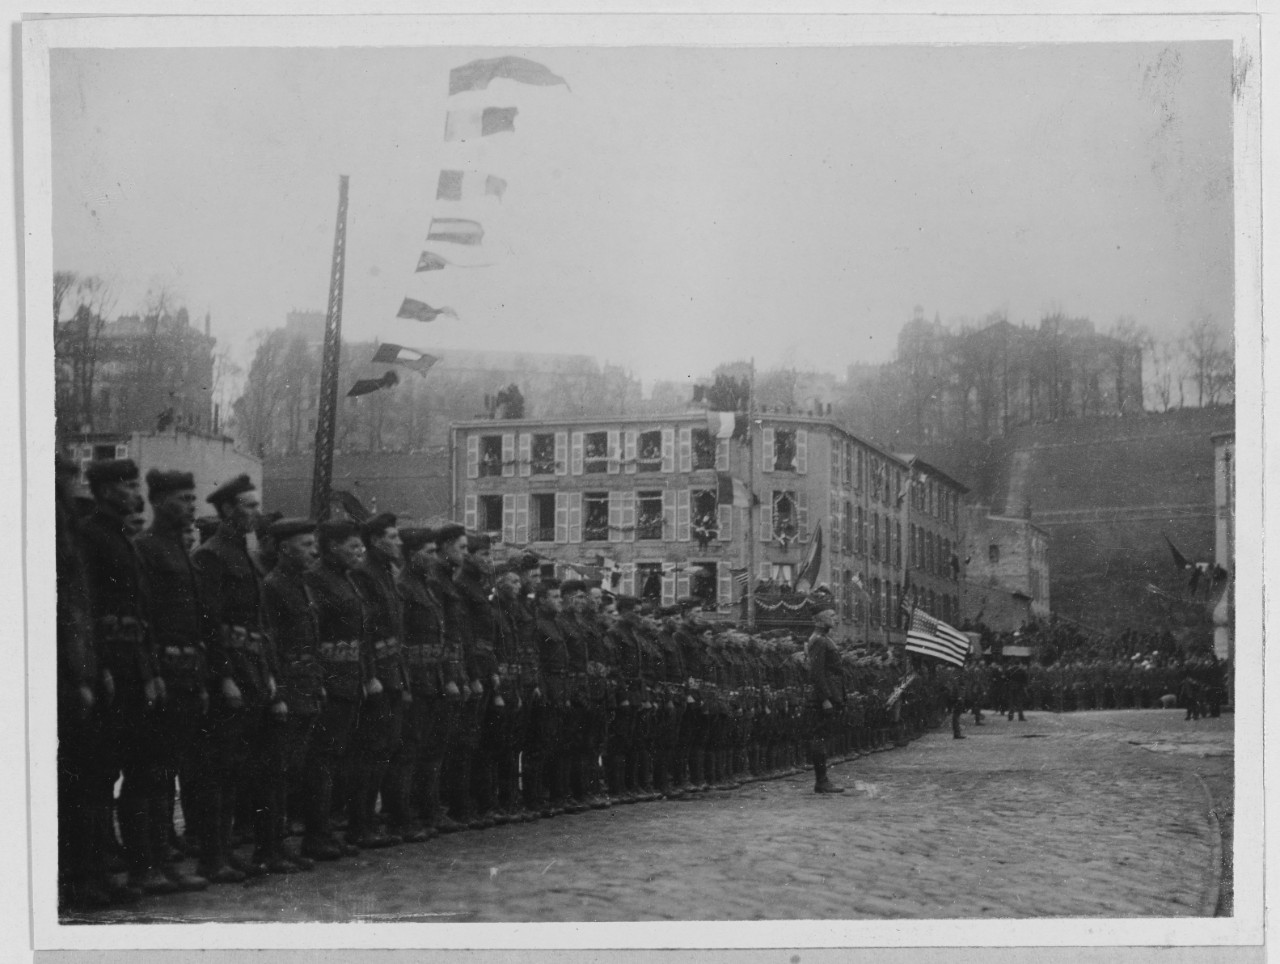 U.S. troops in formation awaiting arrival of President Wilson at Brest